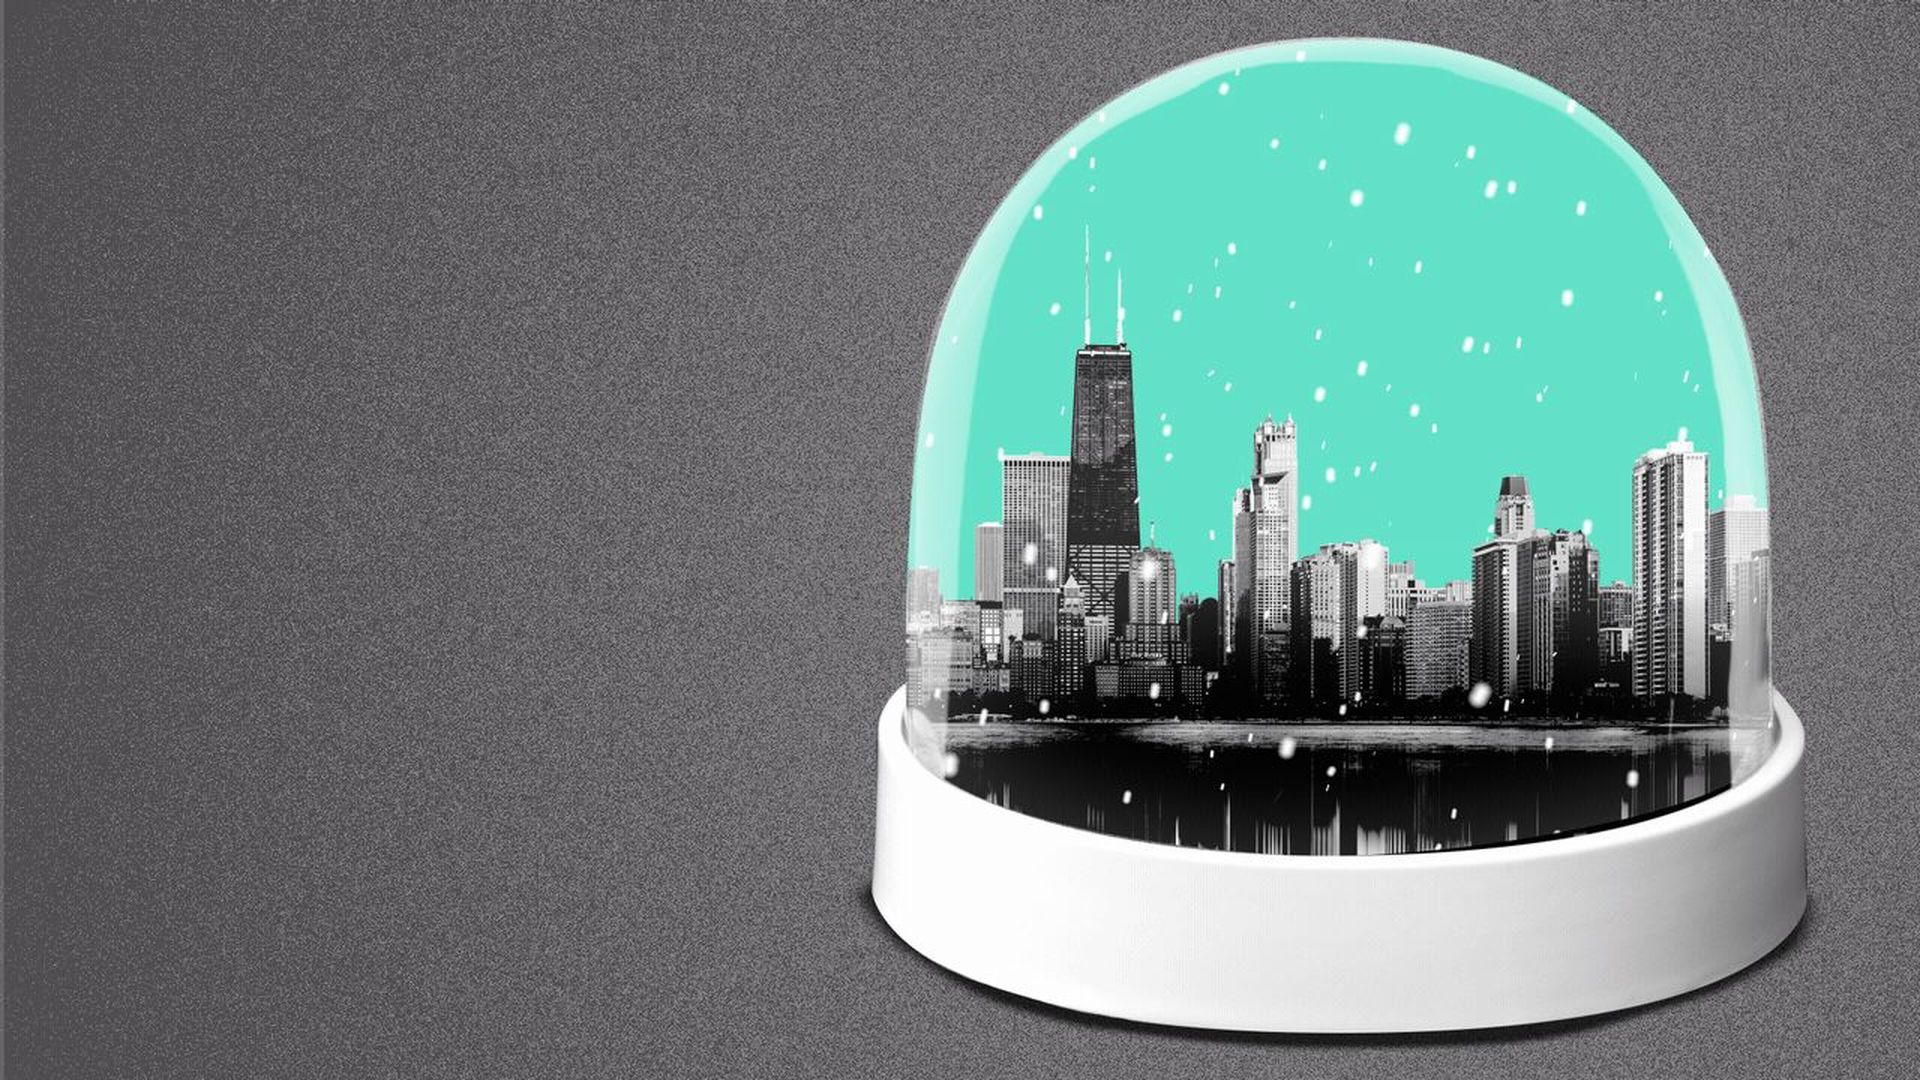 Illustration of a snow globe with the Chicago skyline inside it.